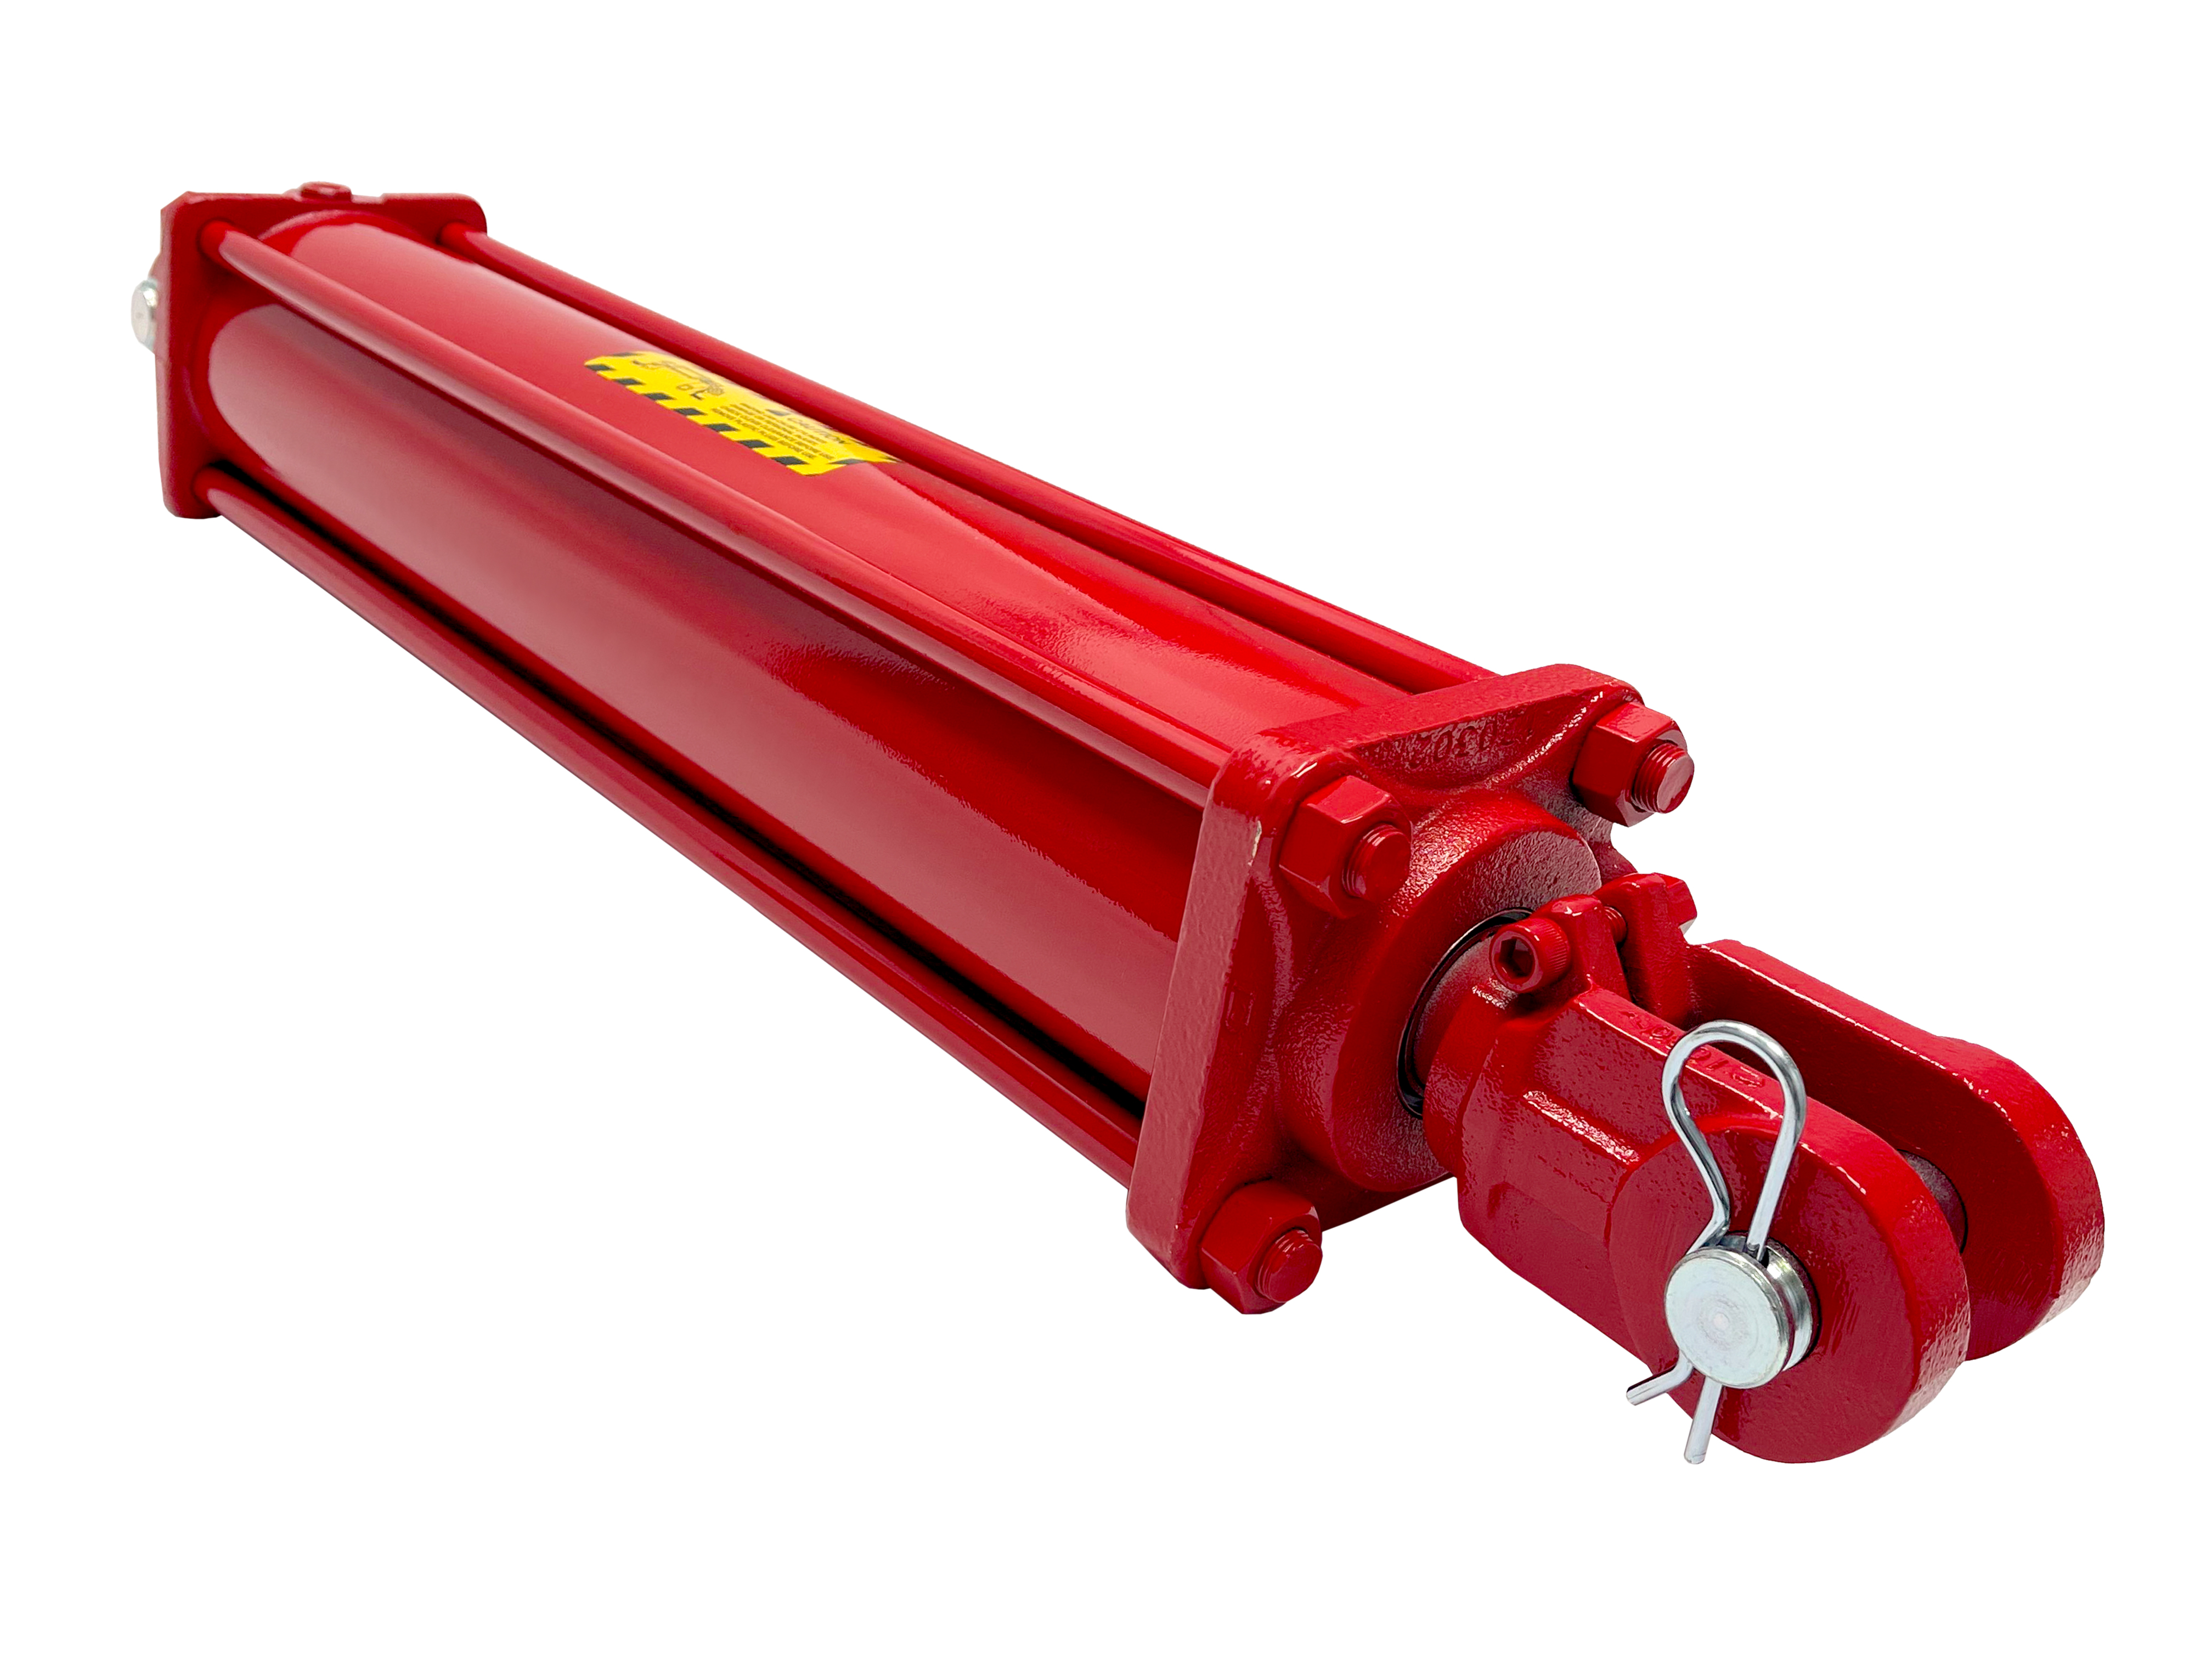 4 bore x 24 stroke 1.5 rod CROSS hydraulic cylinder, tie rod double acting cylinder DB series | CROSS MANUFACTURING